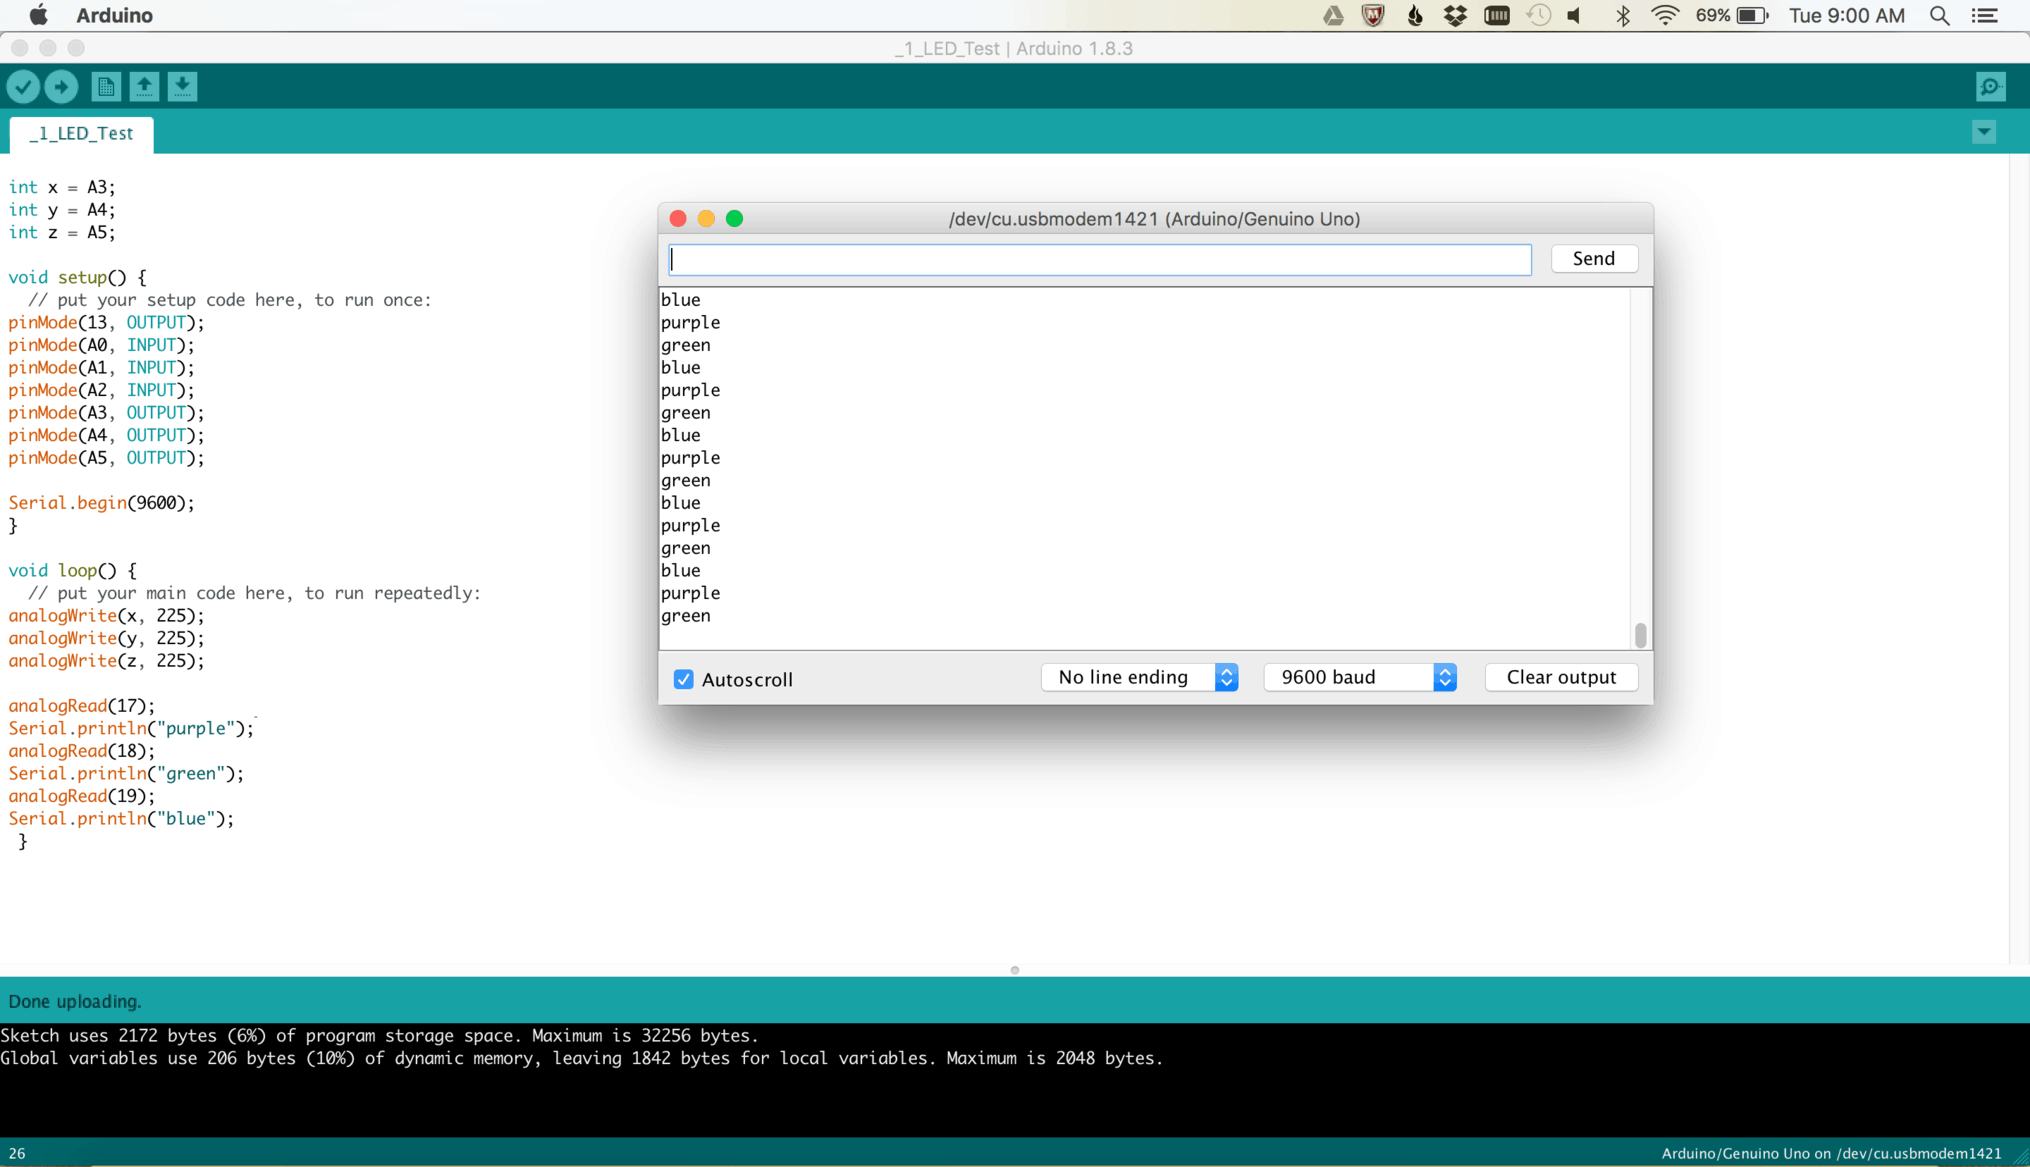 This is the first attempt to test the buttons. This is on Arduino IDE